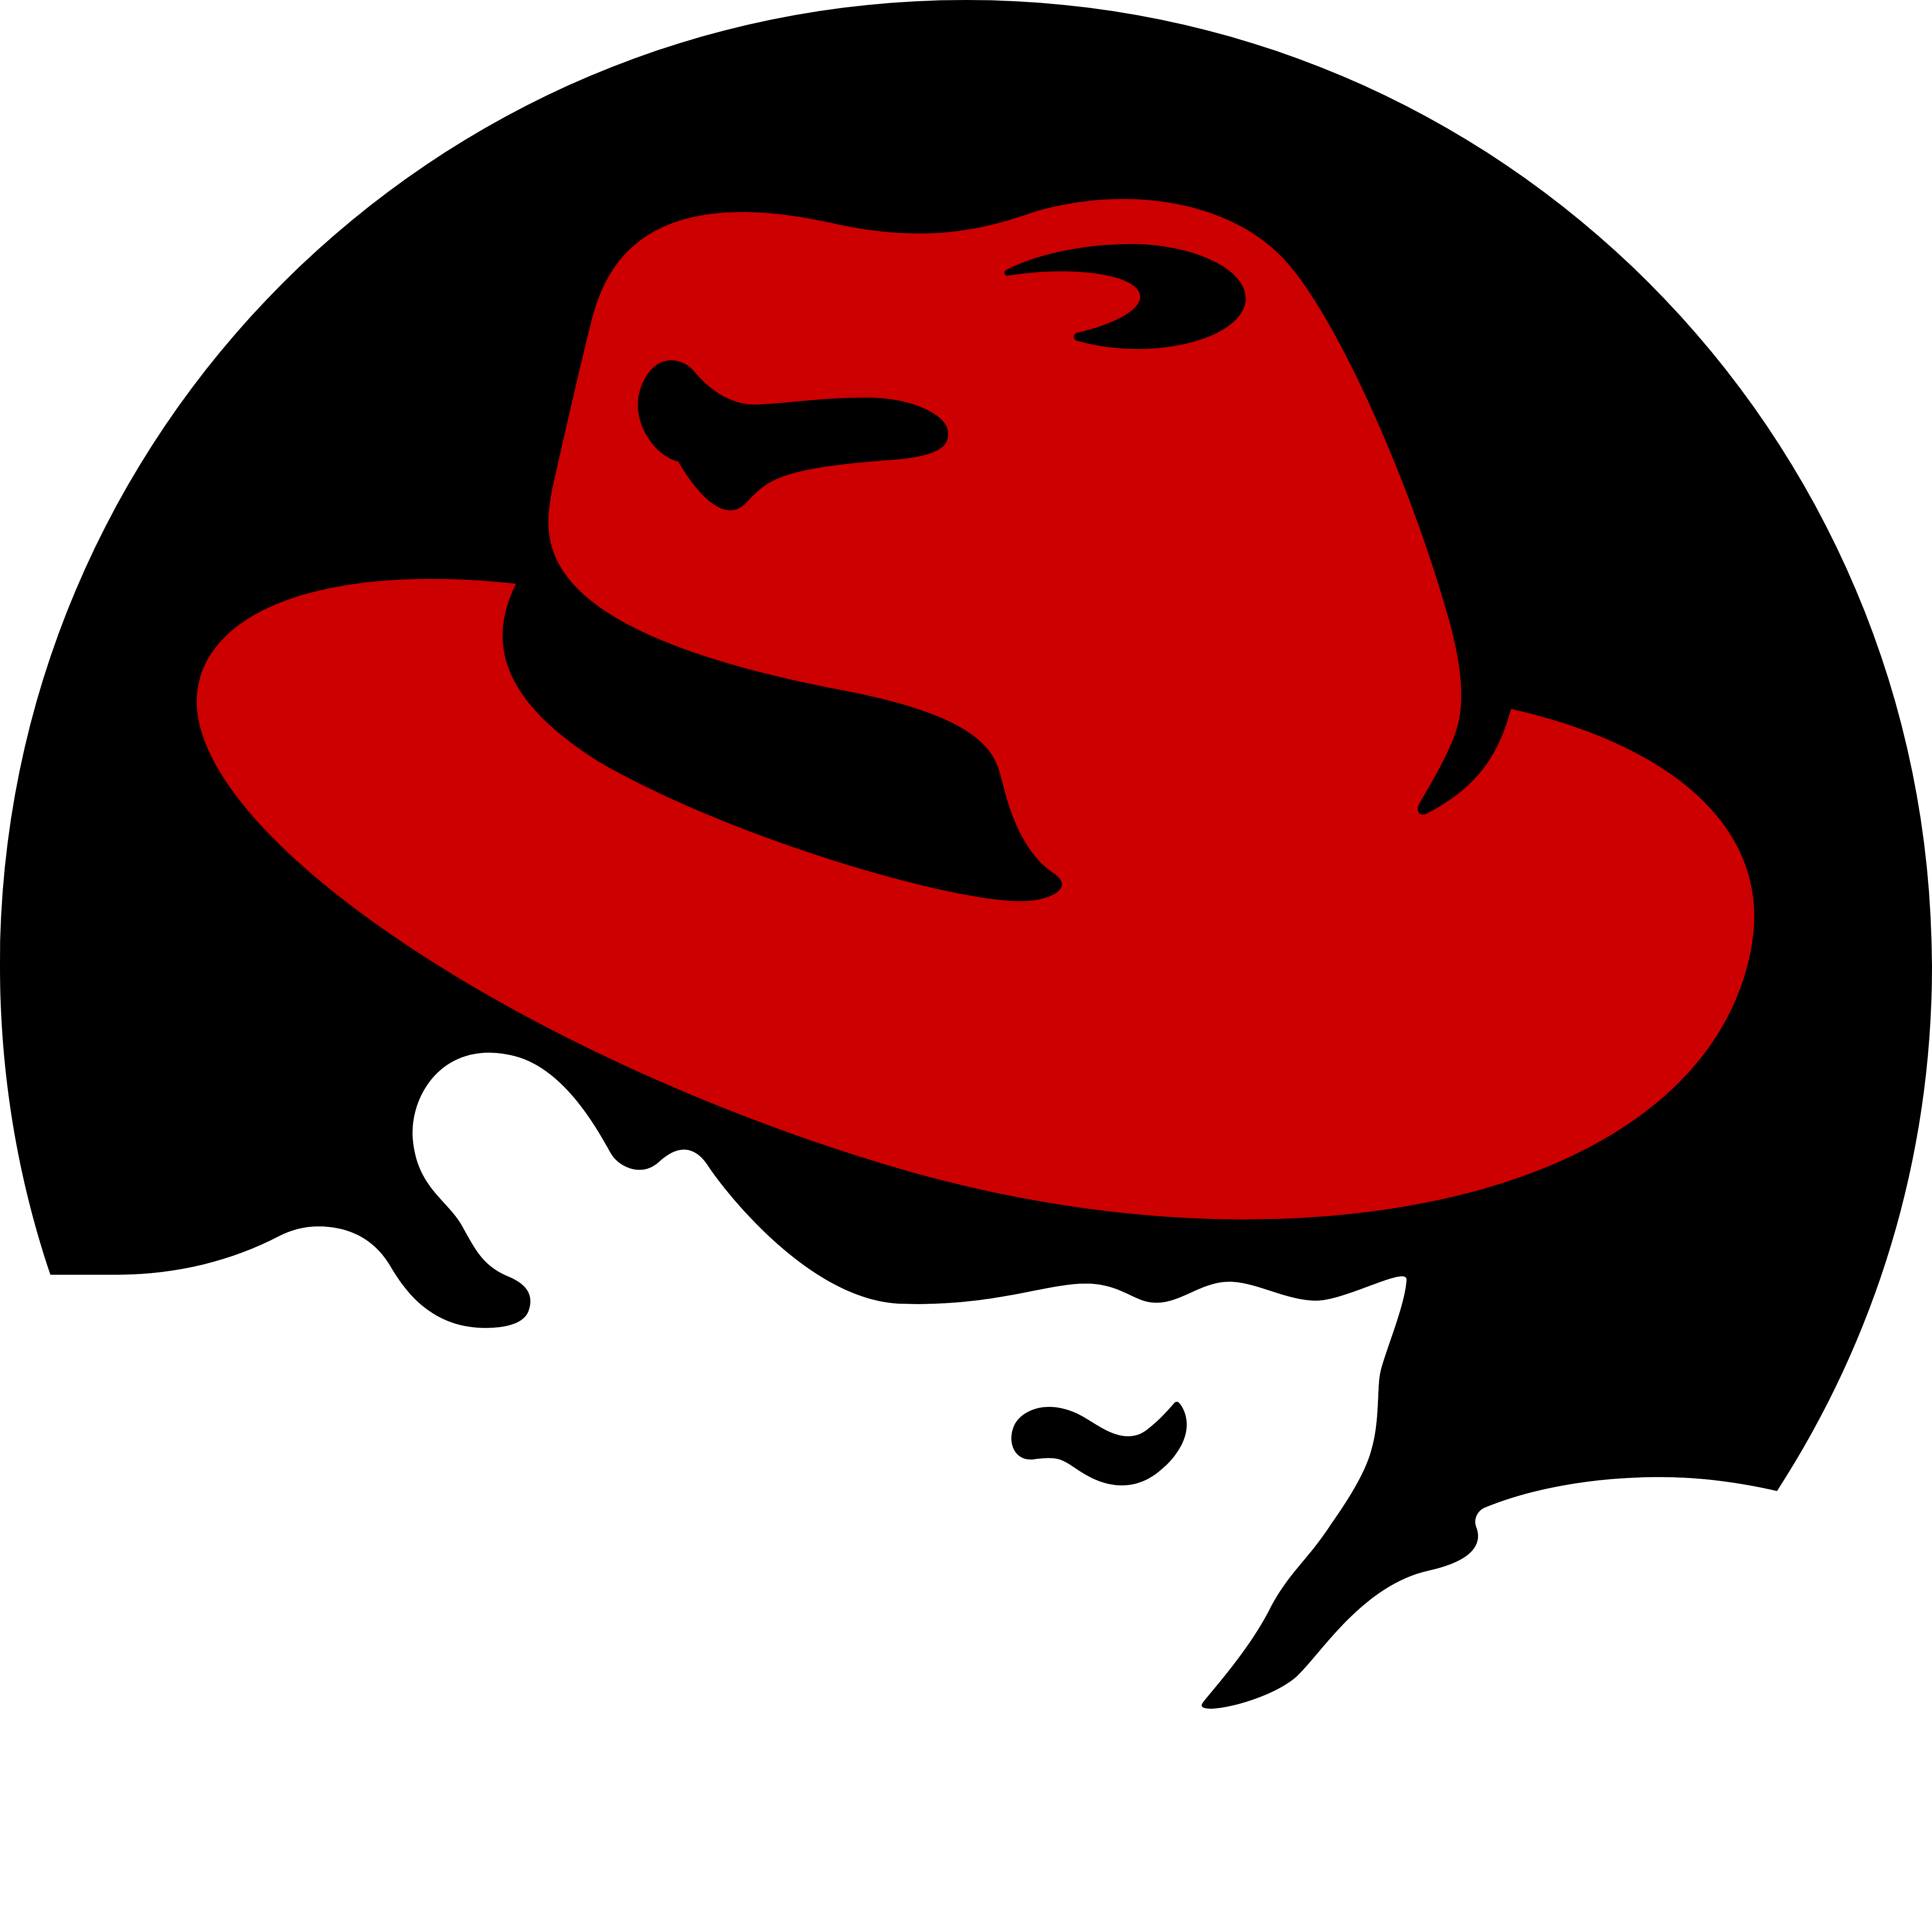 Ред хат. Red hat лого. Ред хат линукс. Red hat Linux logo. Дистрибутивы Linux Red hat.